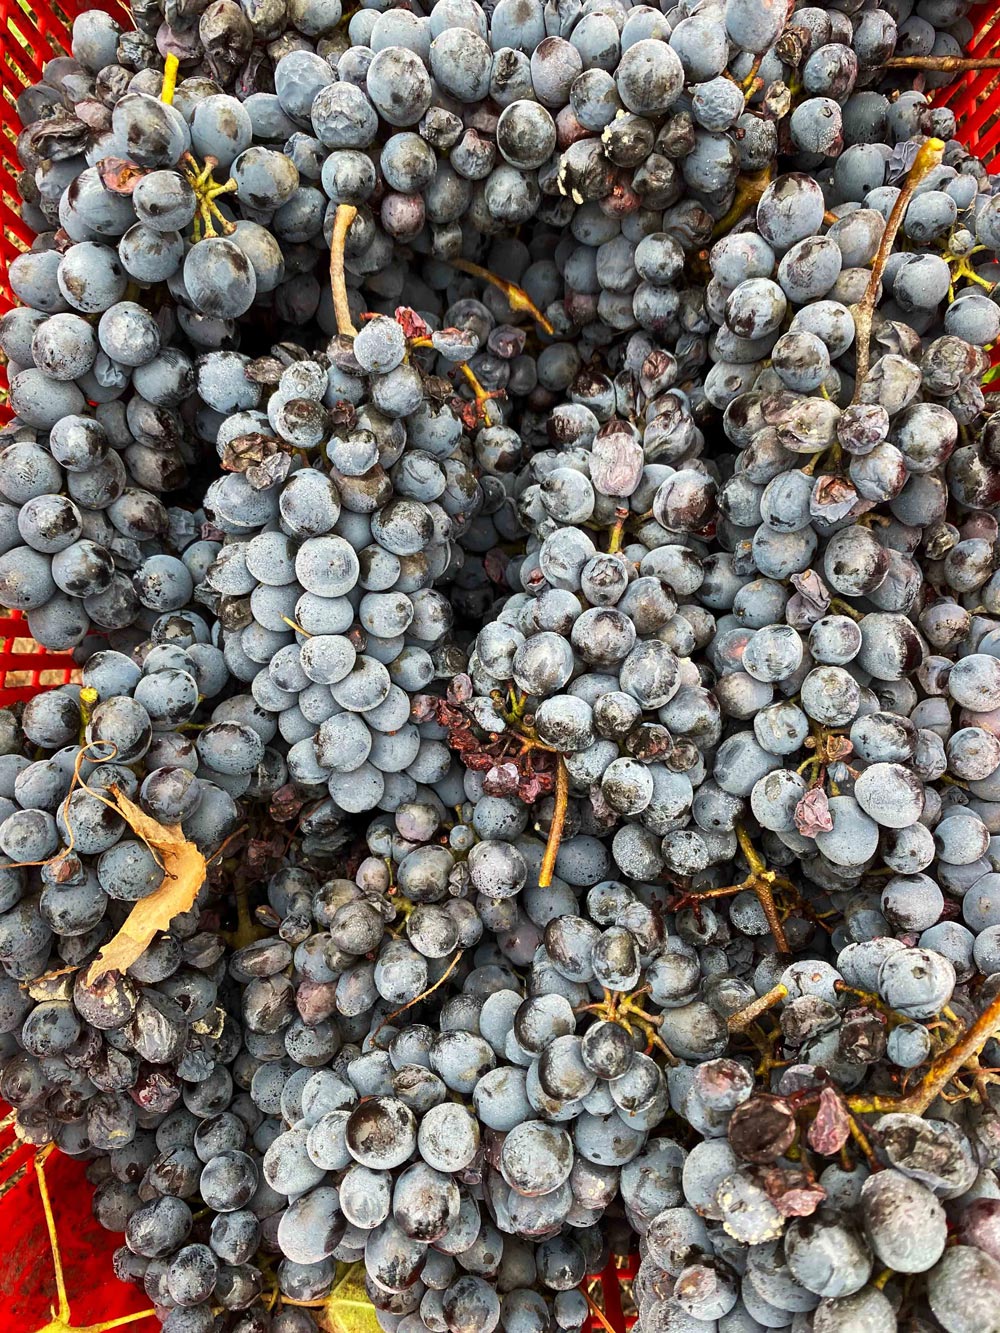 Barbera grapes are recognisably compact and dense.